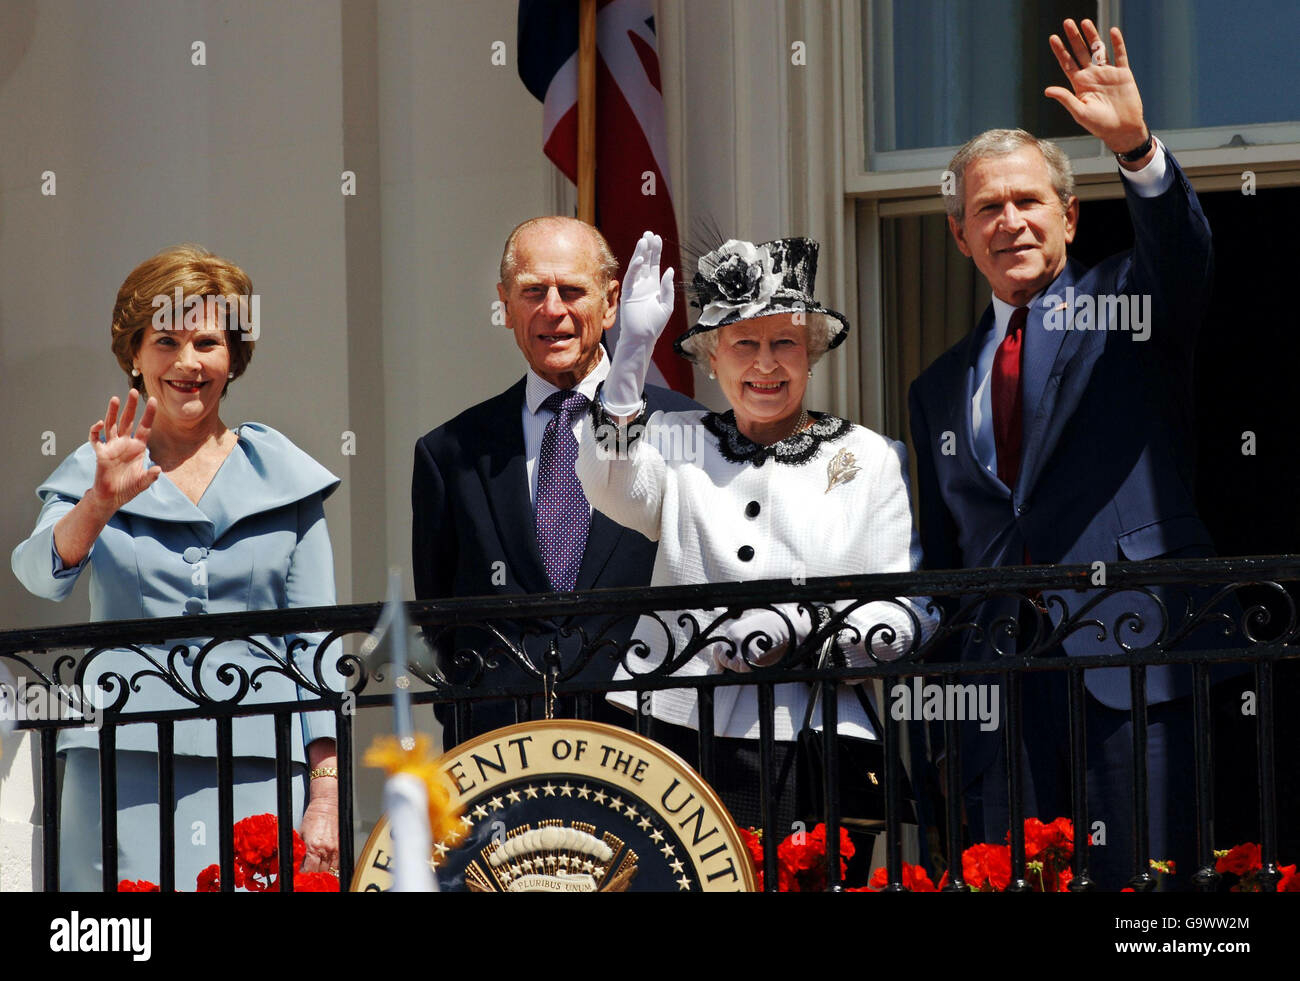 Queen Elizabeth's visit to the United States, in pictures